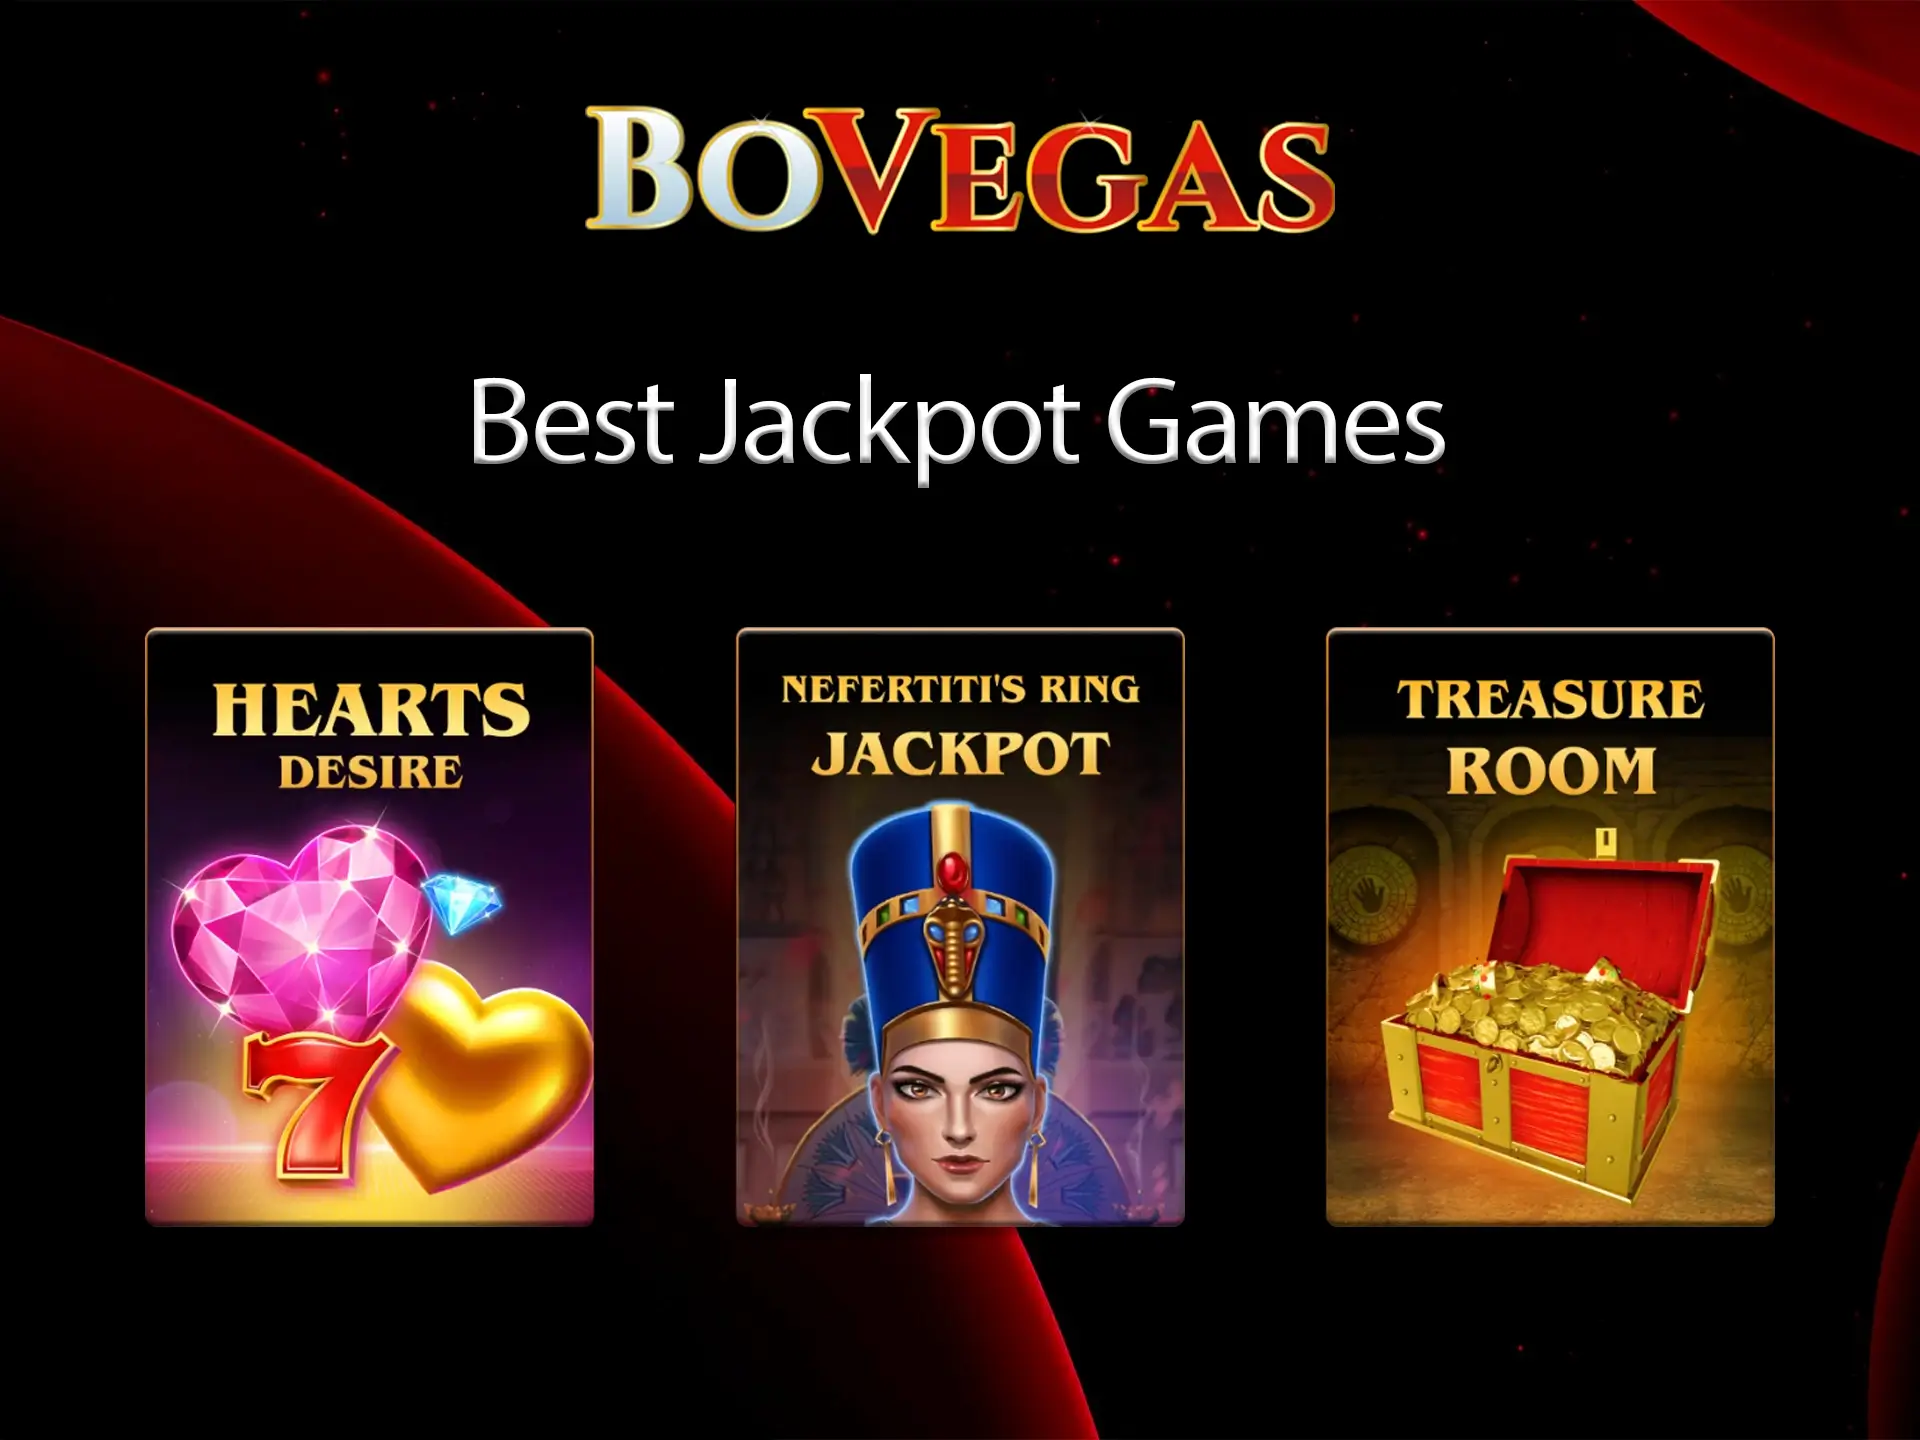 Try the most popular jackpot games among players in Australia and BoVegas Casino.